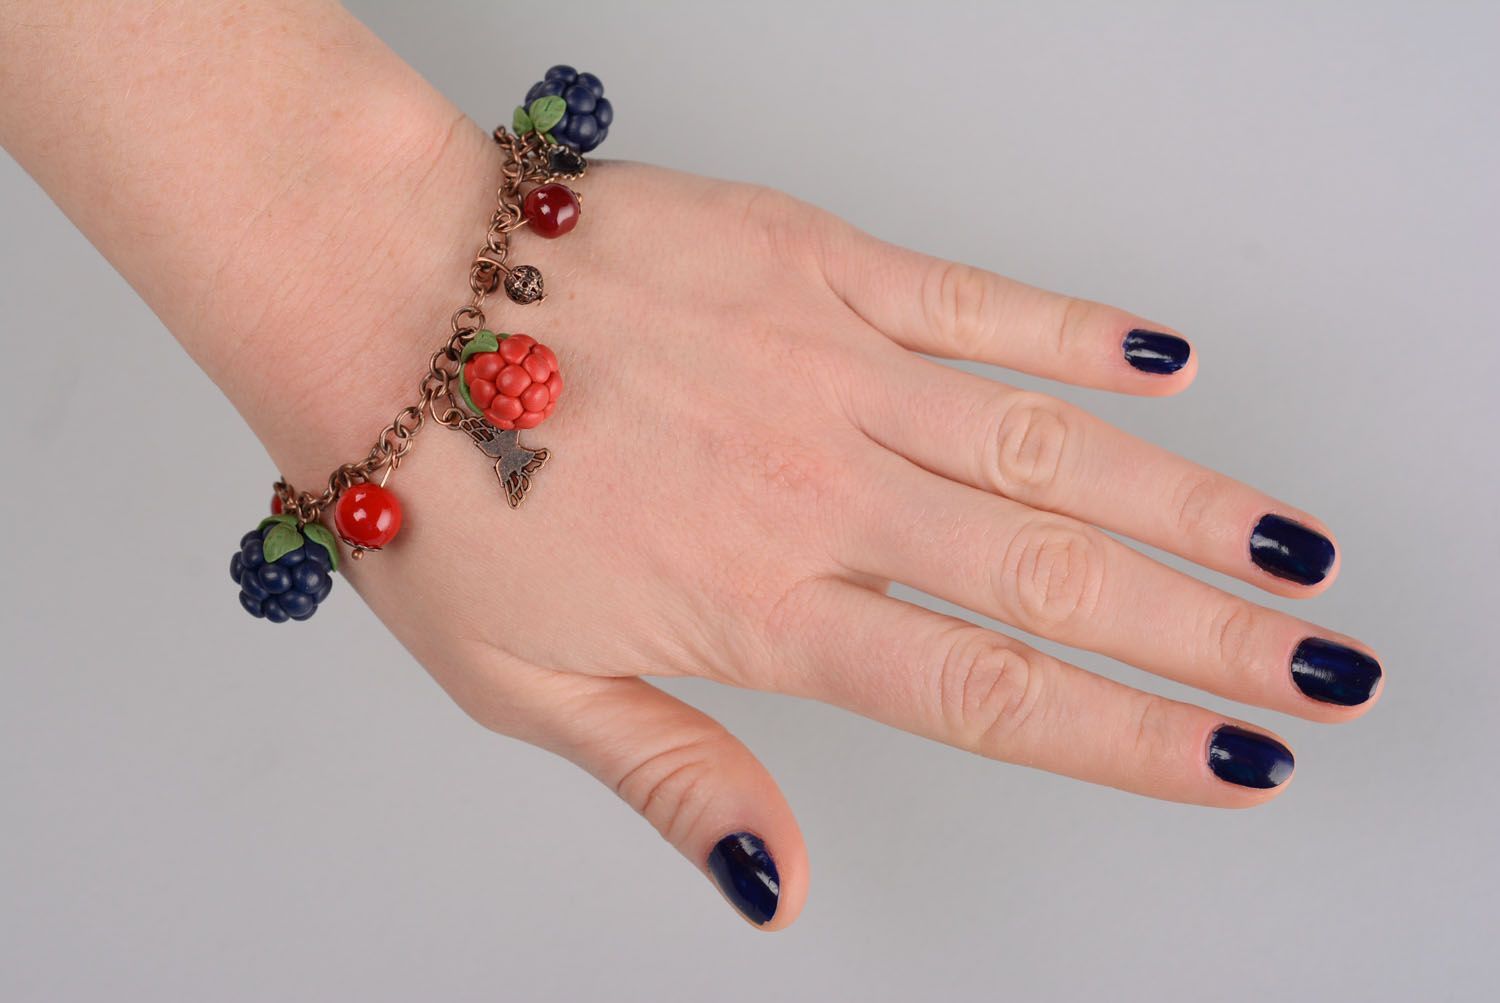 Plastic bracelet with charms in the shape of berries photo 2